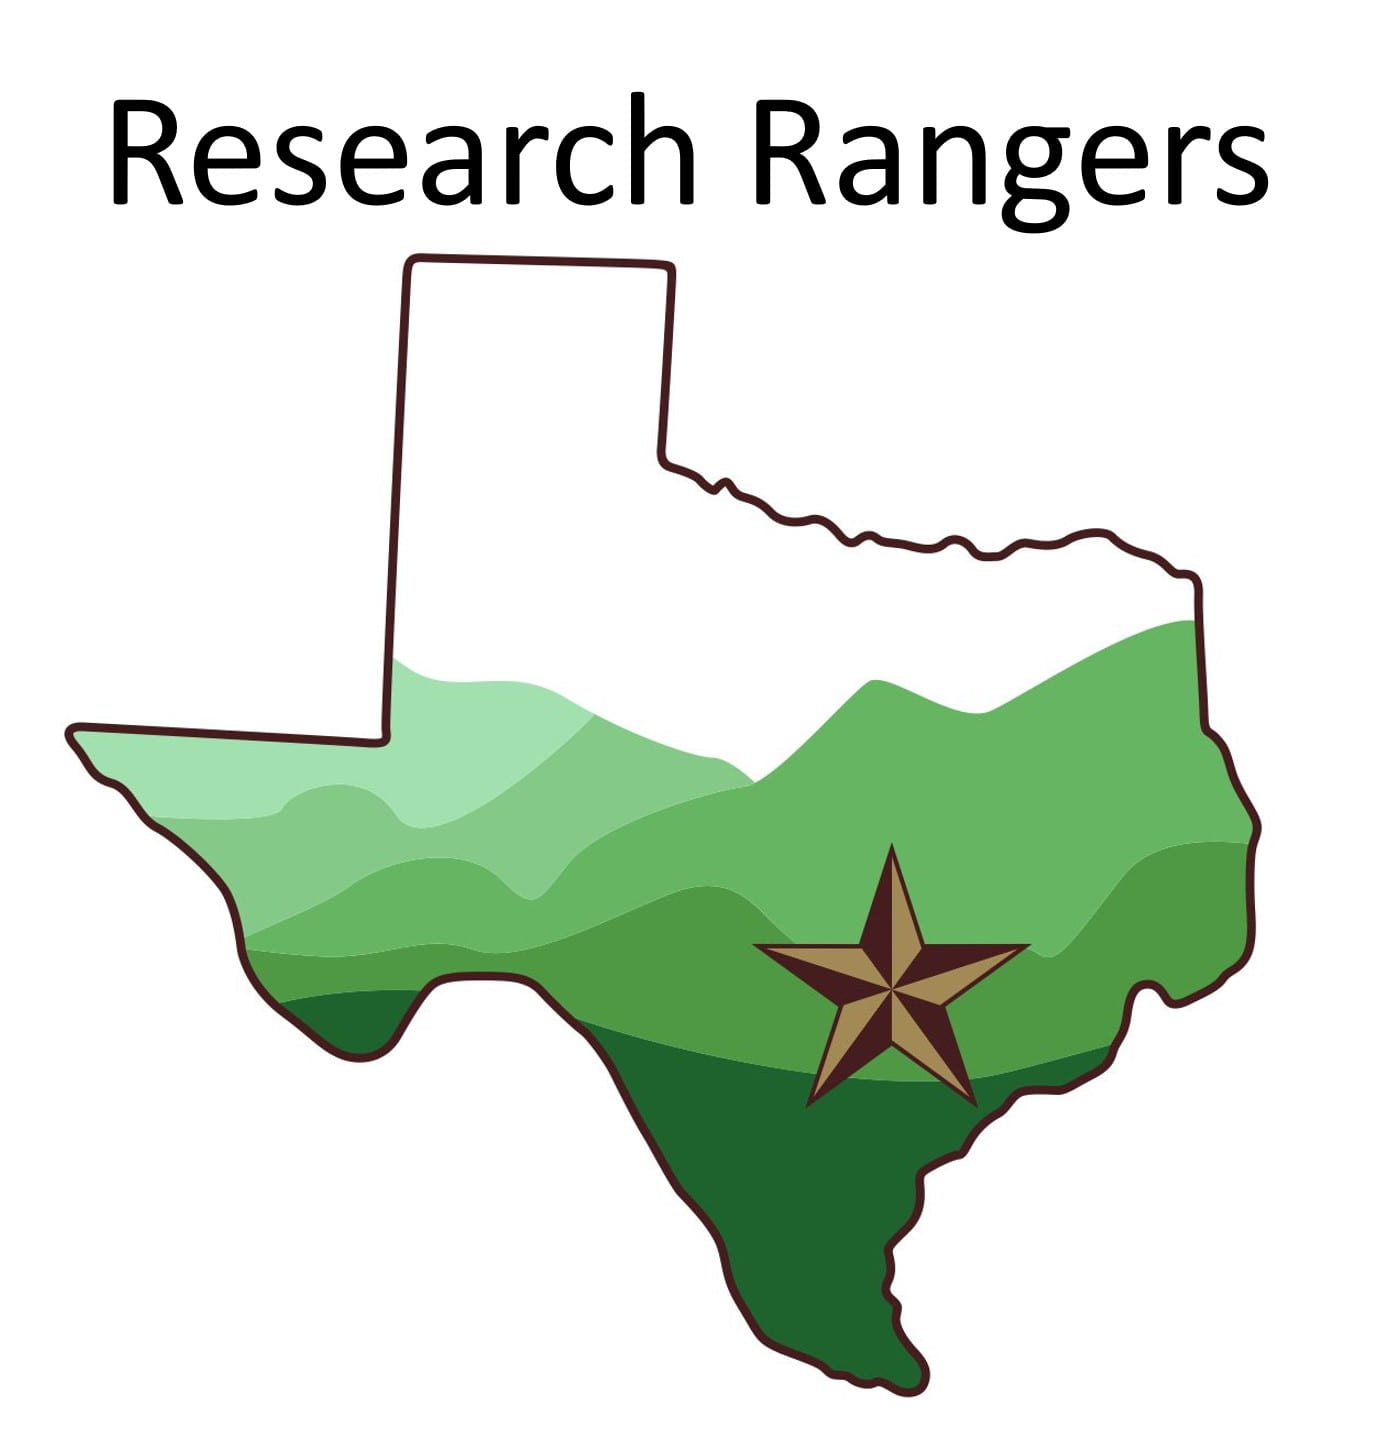 Research Rangers